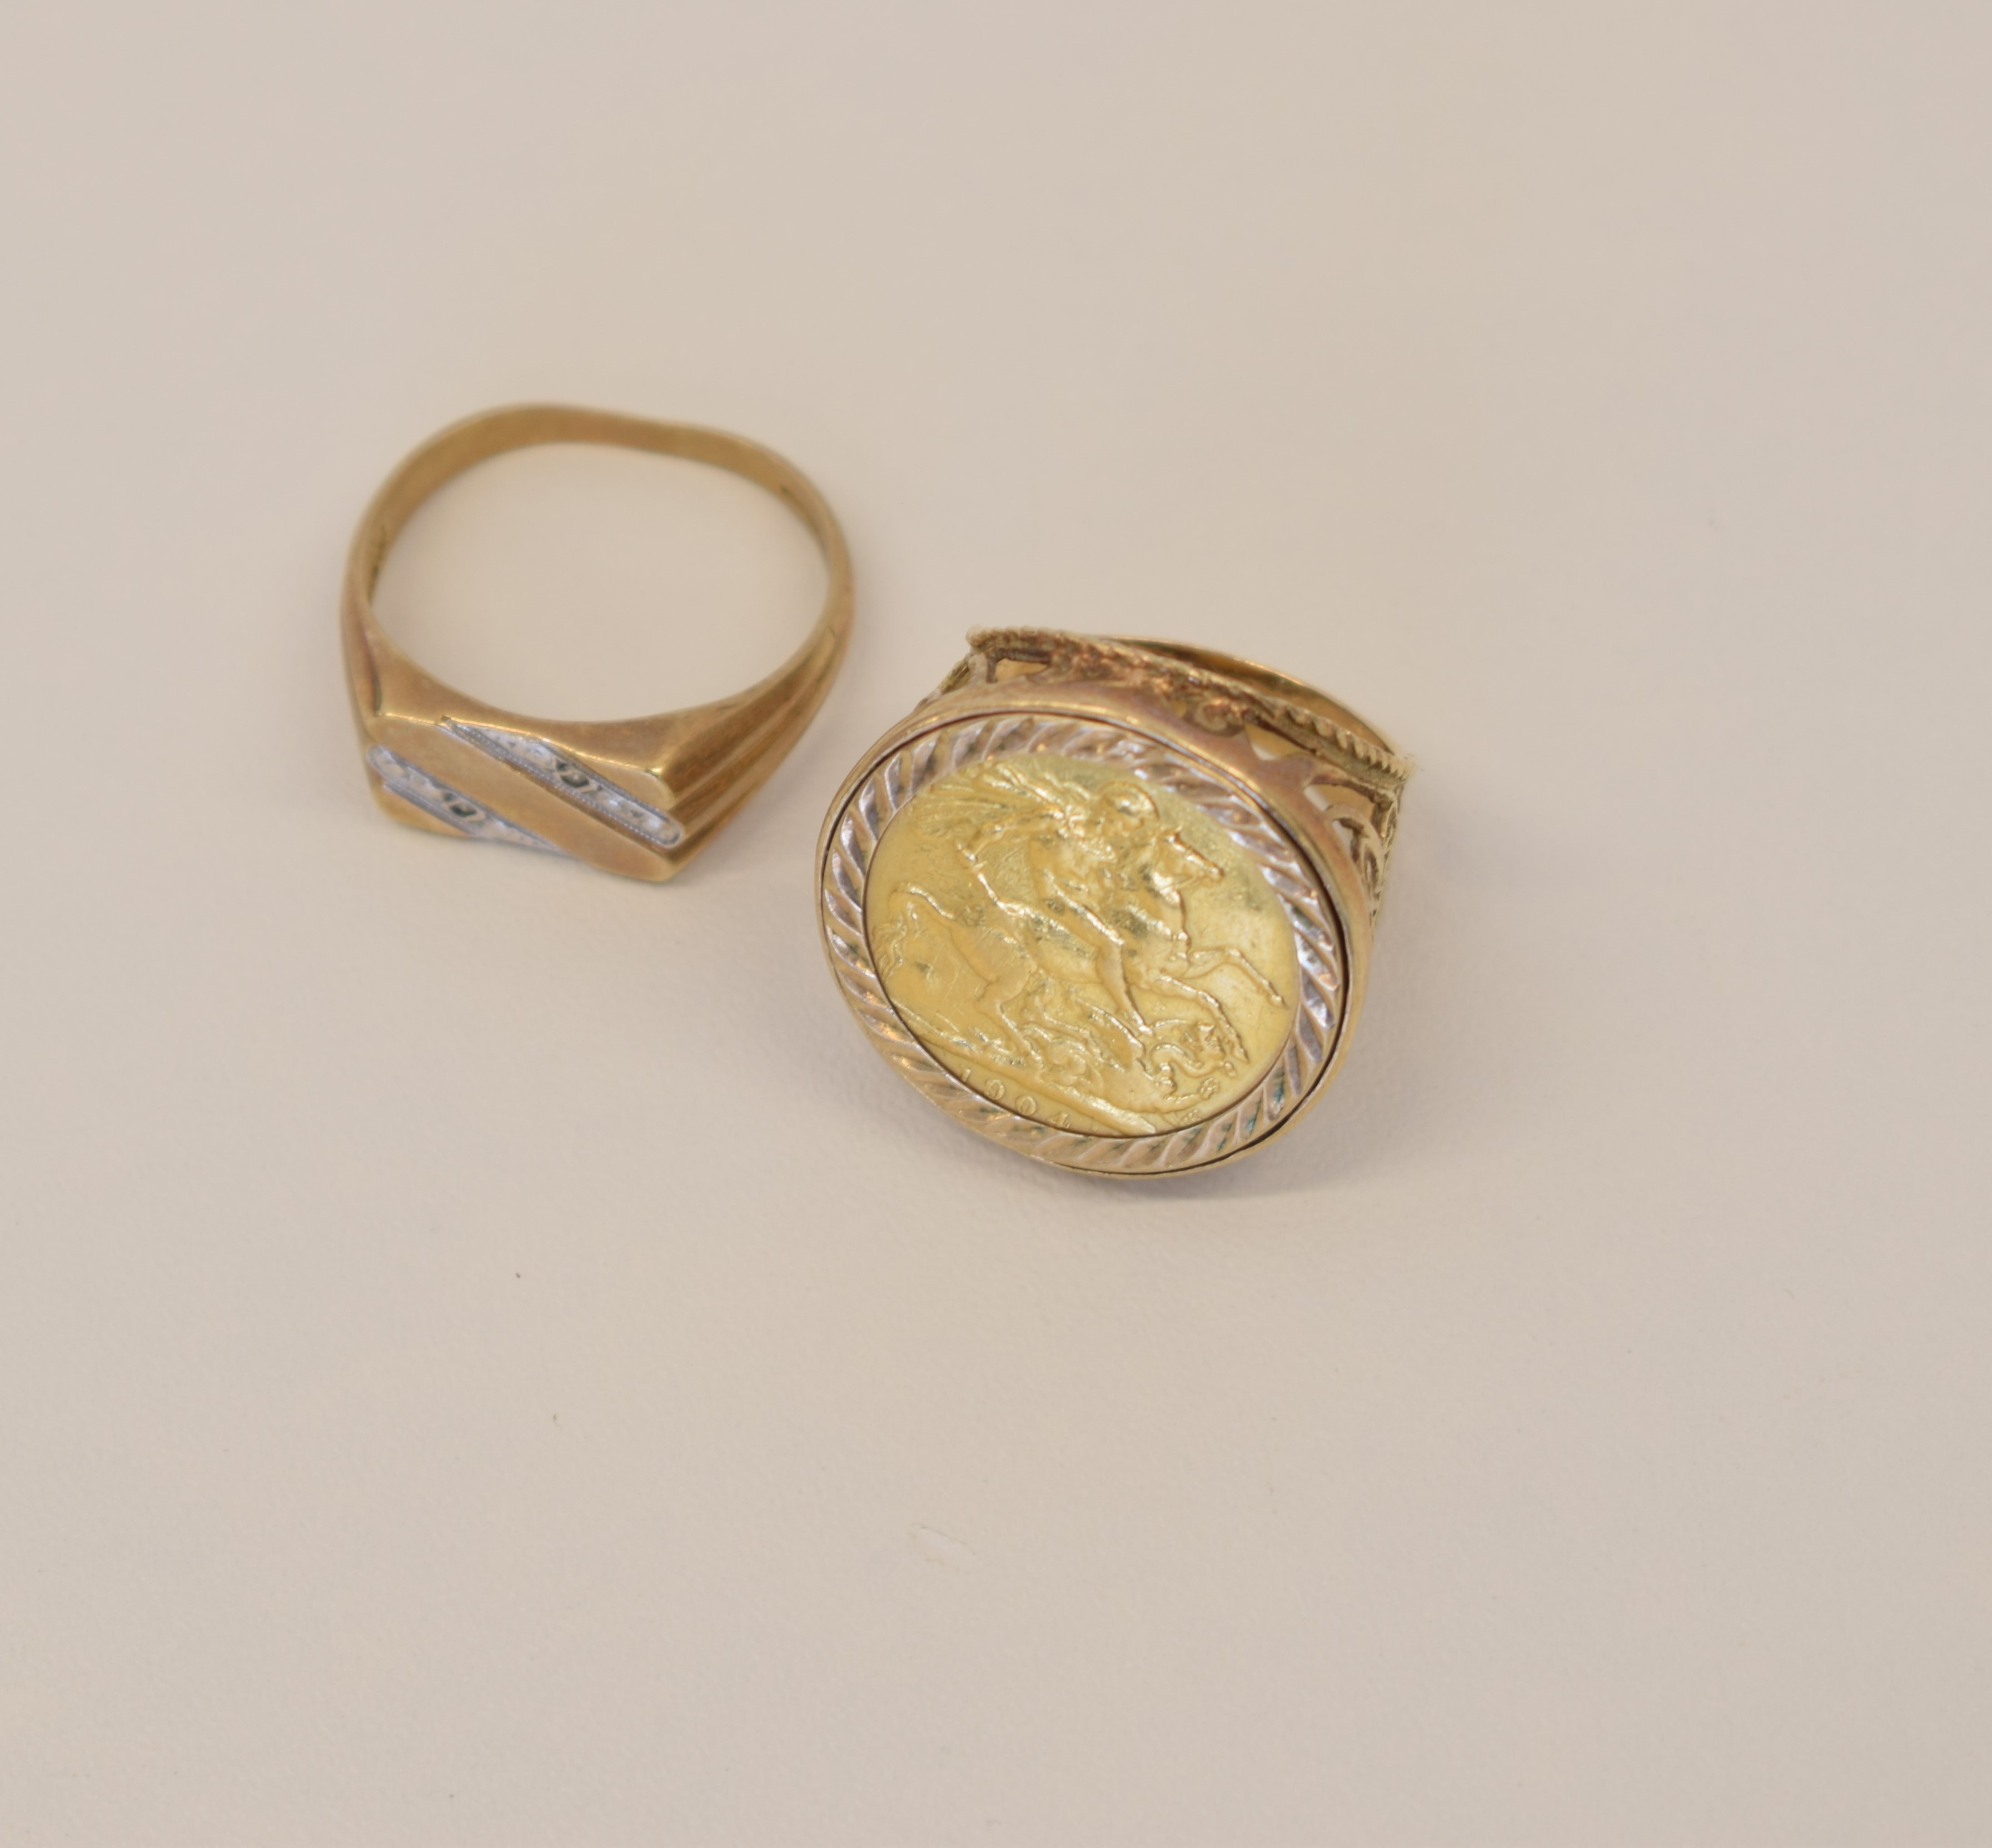 Miscellaneous 22ct yellow gold hallmarked coin and Gents 9ct yellow gold hallmarked ring